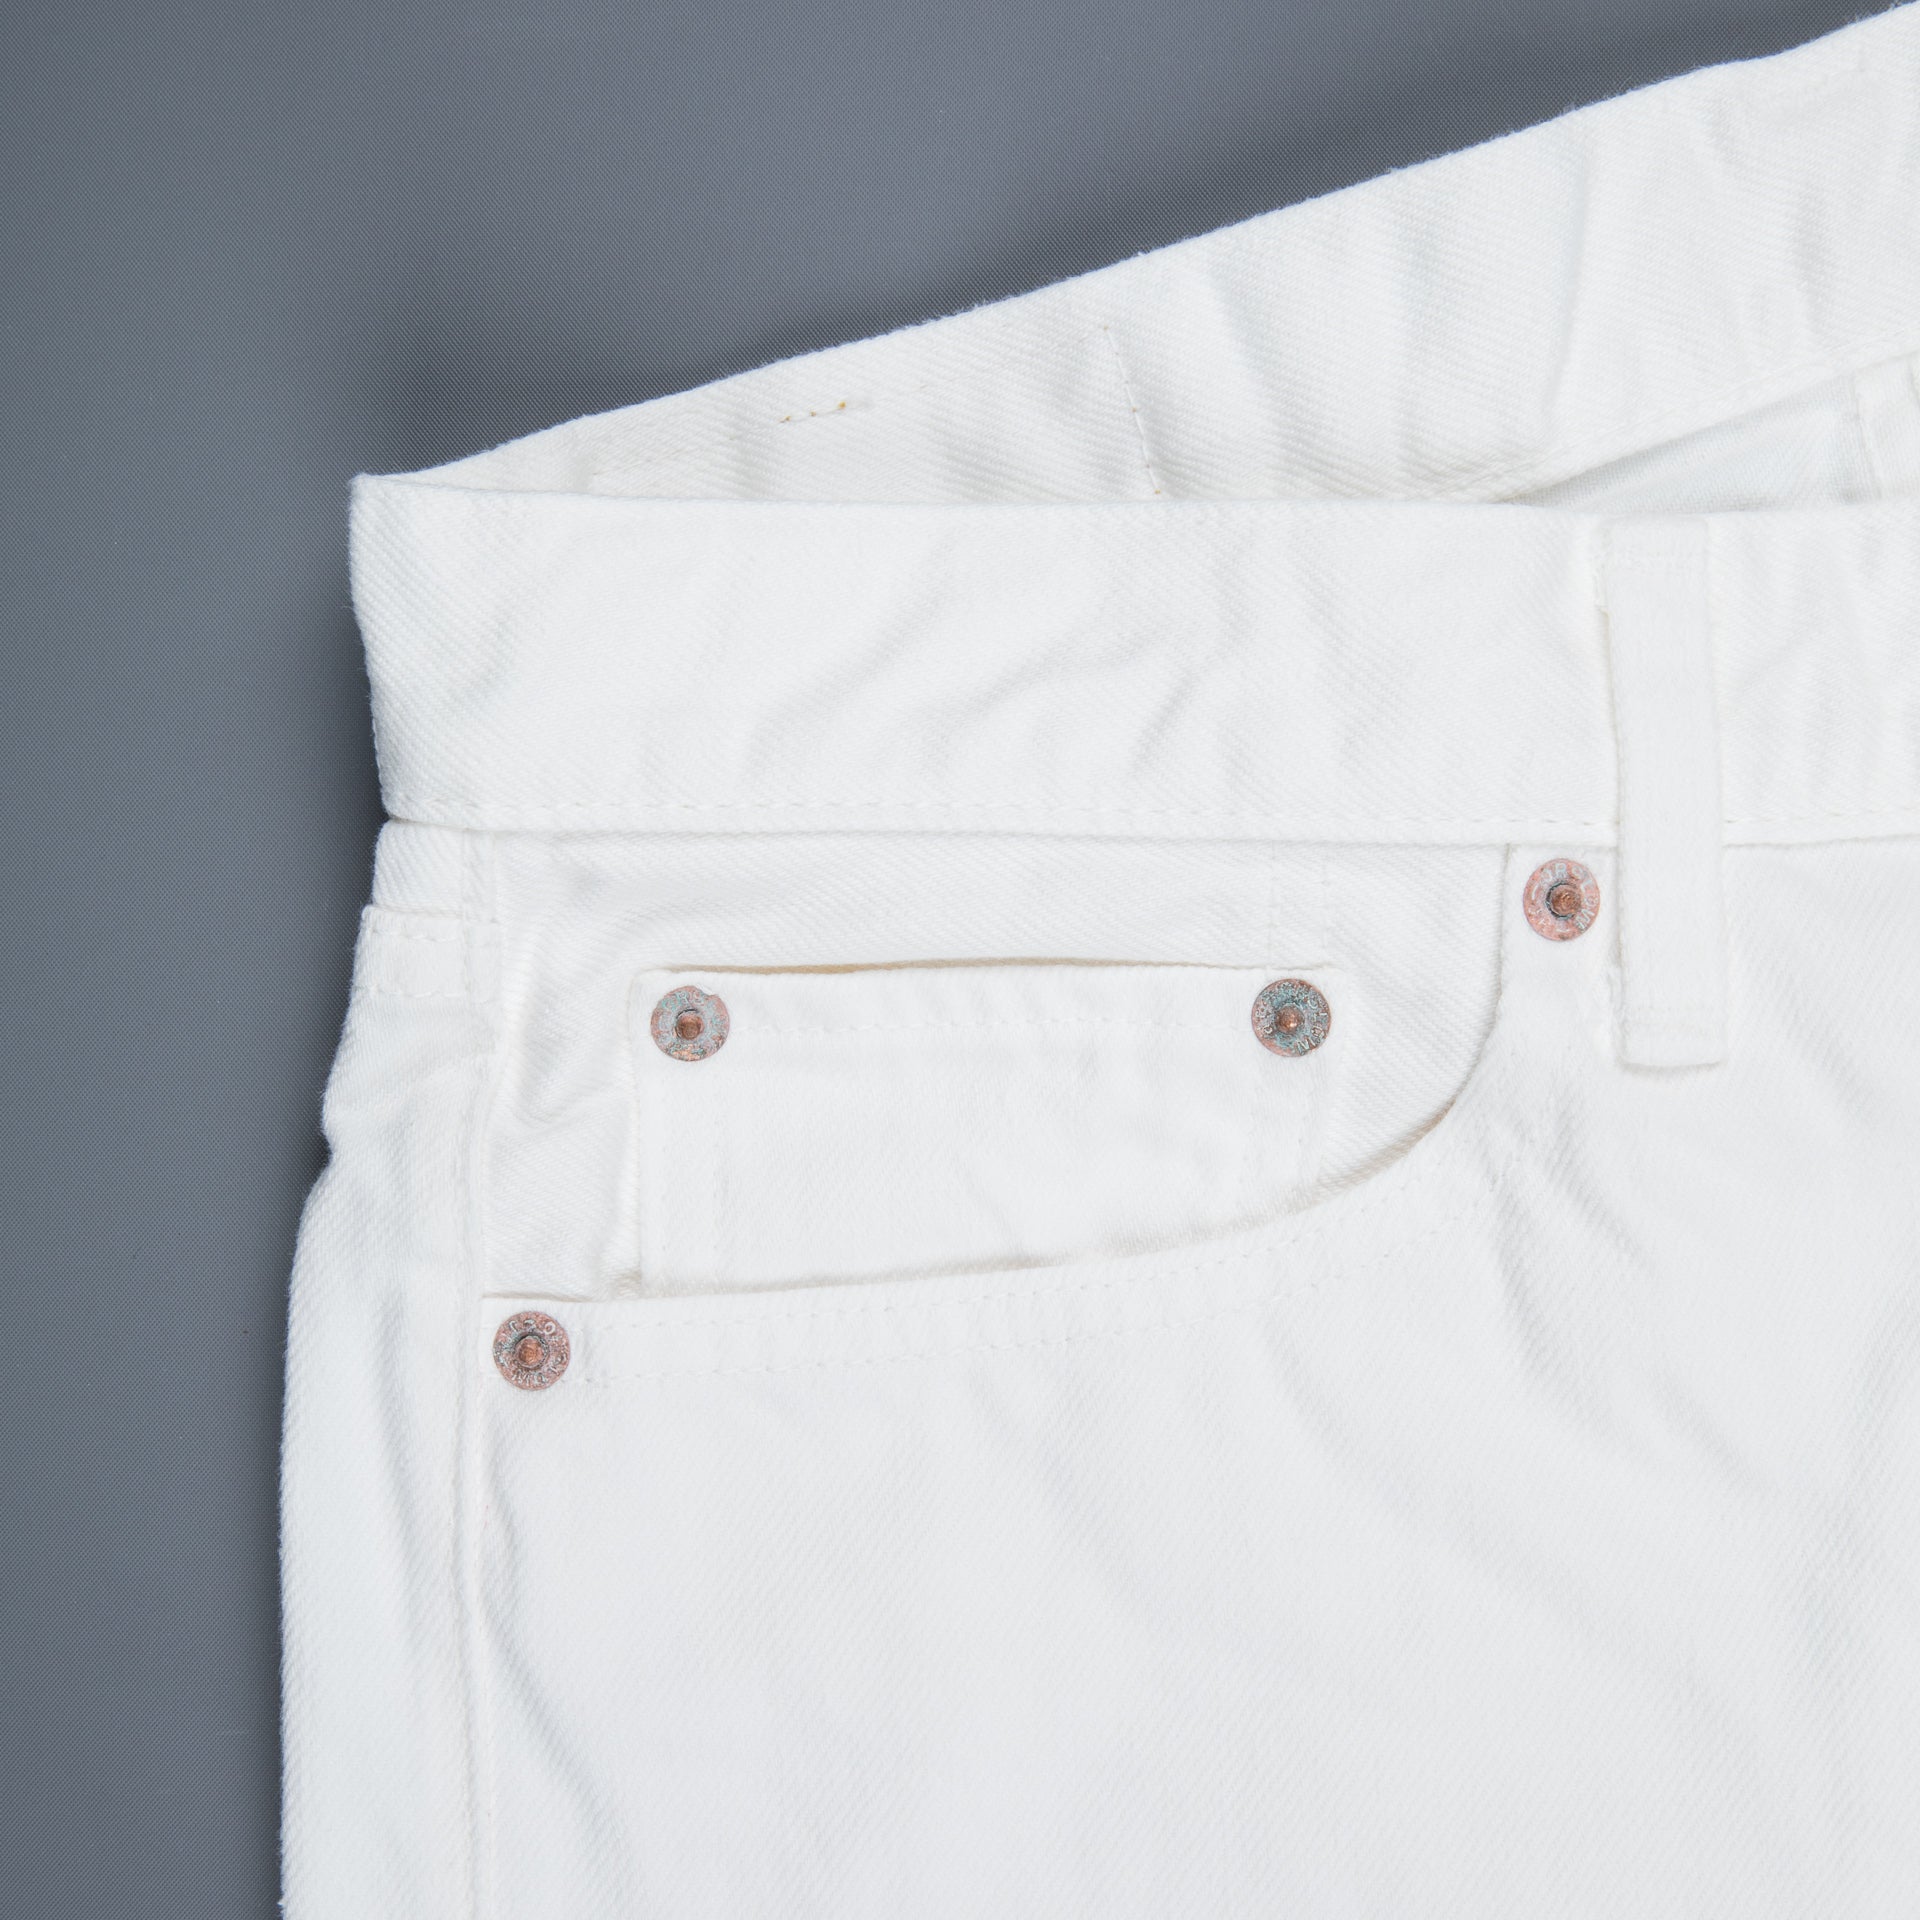 Orslow x Frans Boone Exclusive White Selvedge Denim Model 107 Ivy Fit ...